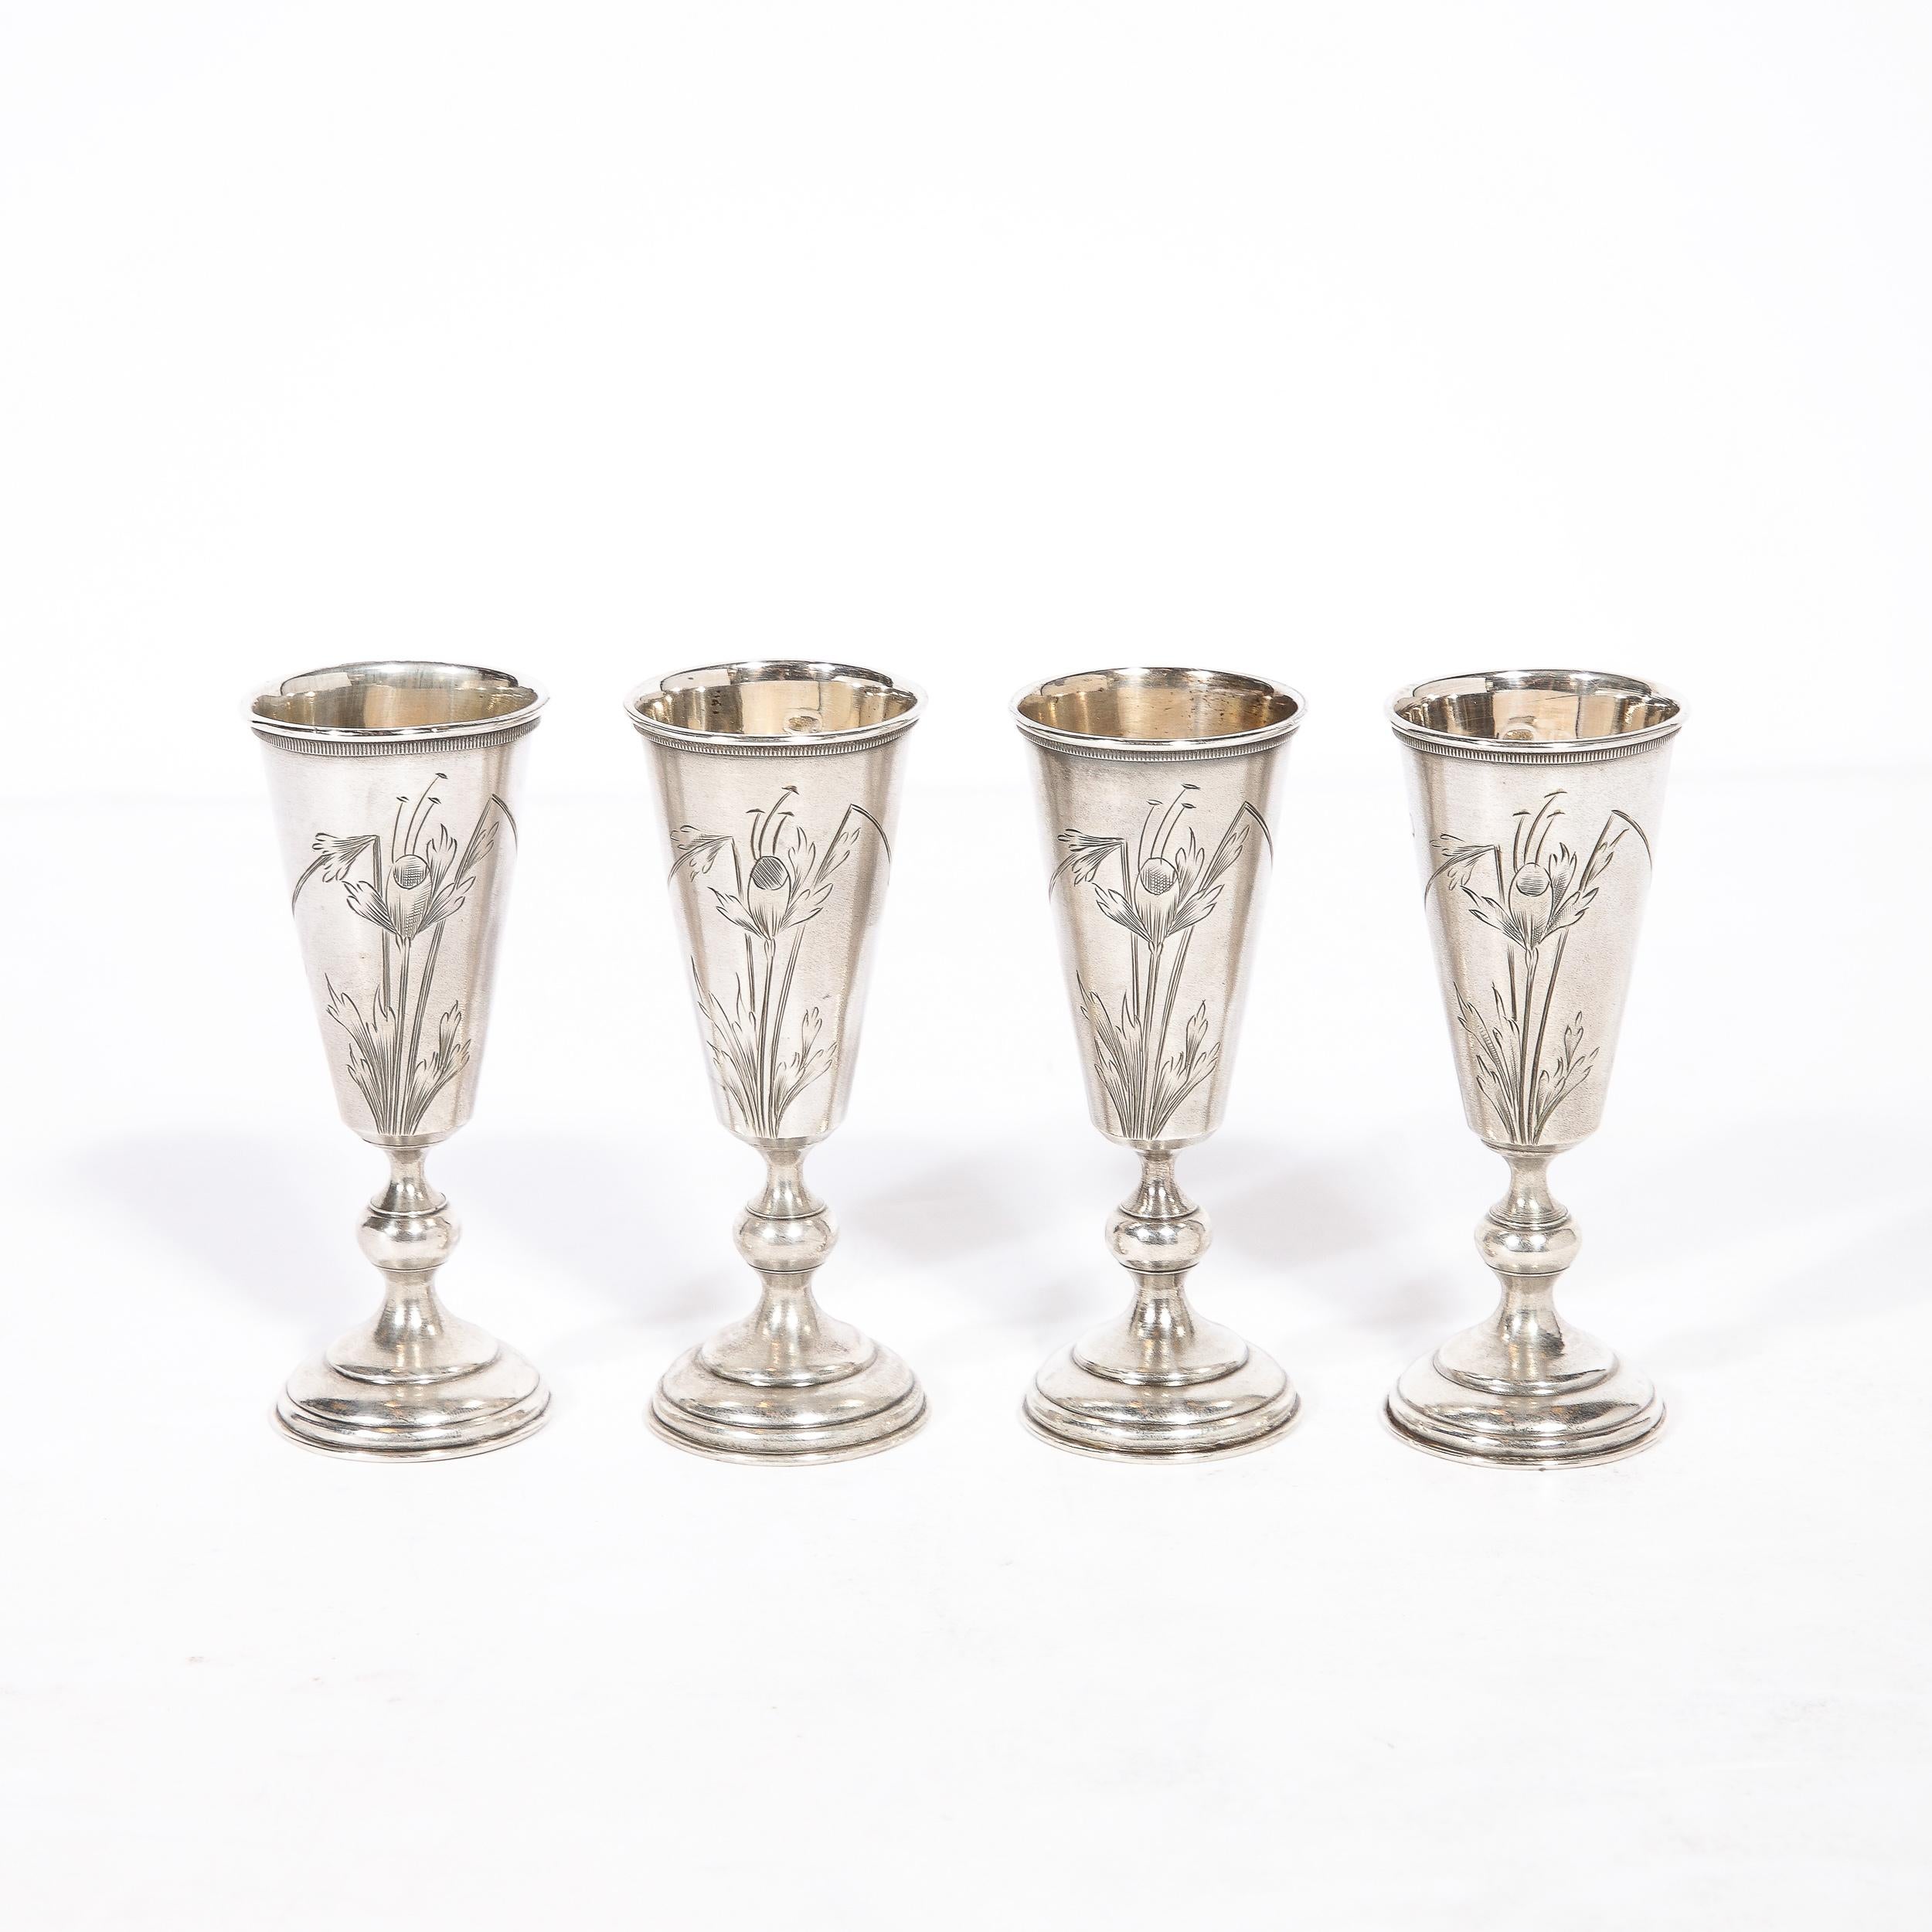 This beautiful set of four antique sterling silver Kiddish cups were realized in Russia, circa 1885. They feature circular tiered bases with undulating stems complete with a spherical detail. The elongated subtly conical cups are hand inscribed with